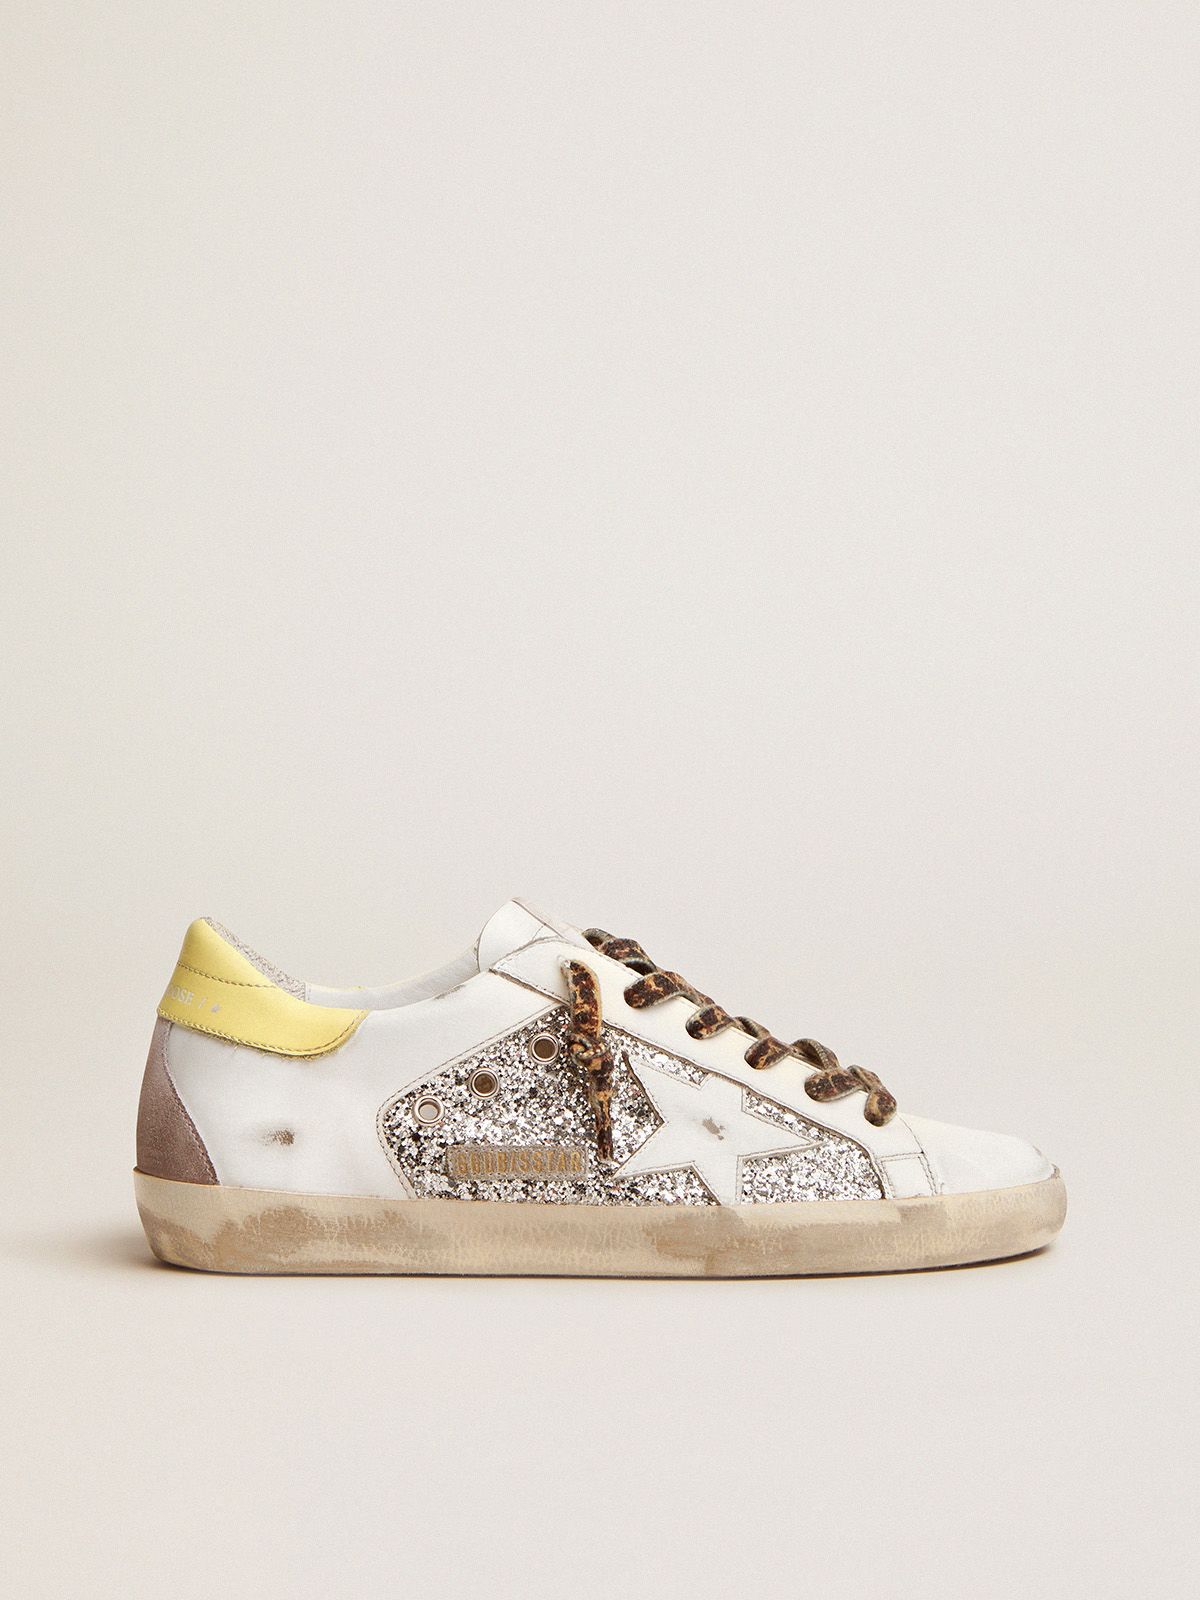 Sneakers Uomo Golden Goose LTD Super-Star Sneakers in leather and glitter with colorful heel tab